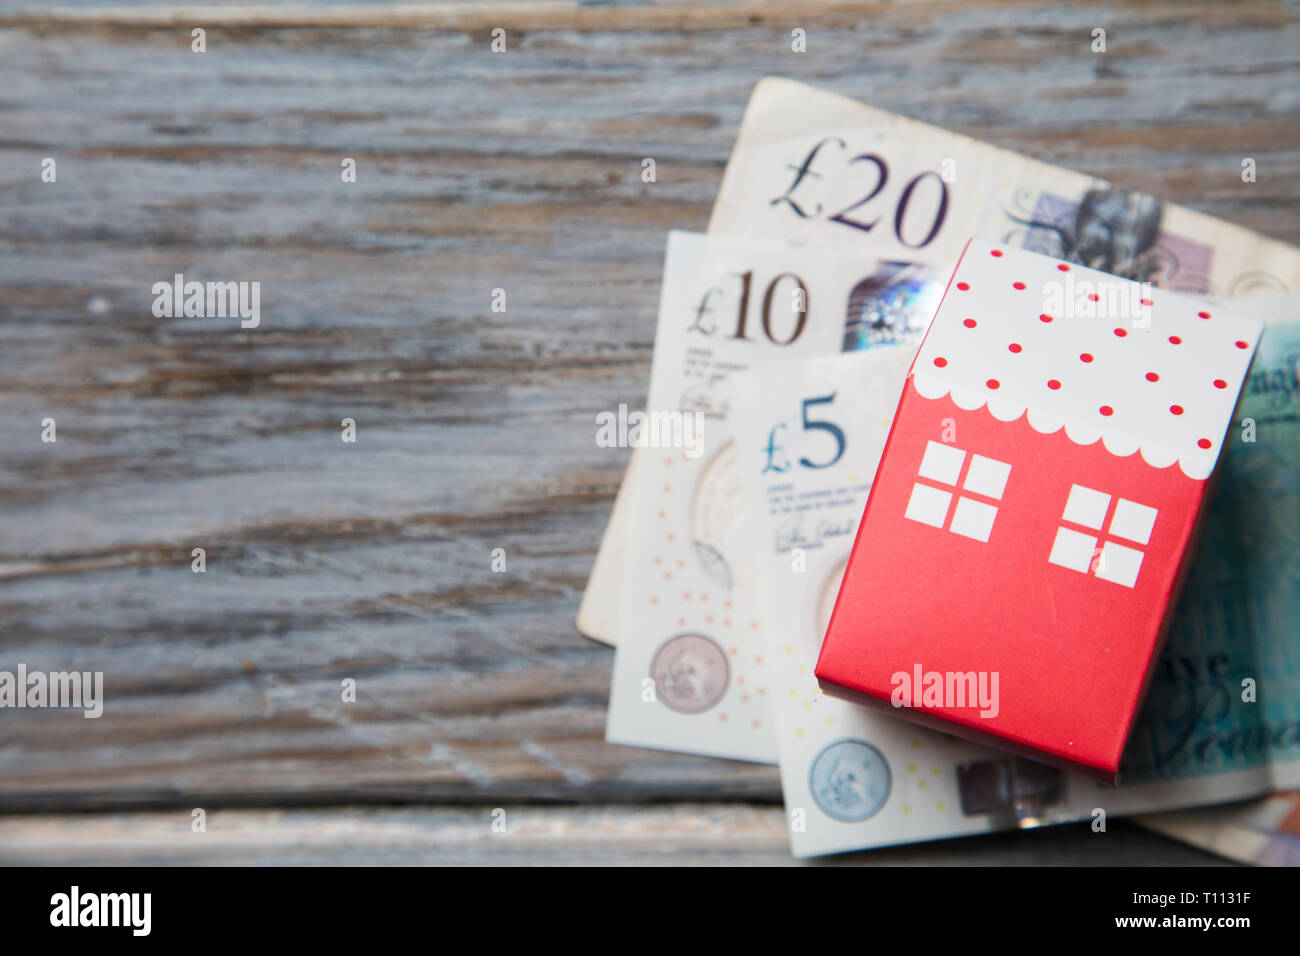 Housing cost. Paper toy house with British currency notes Stock Photo